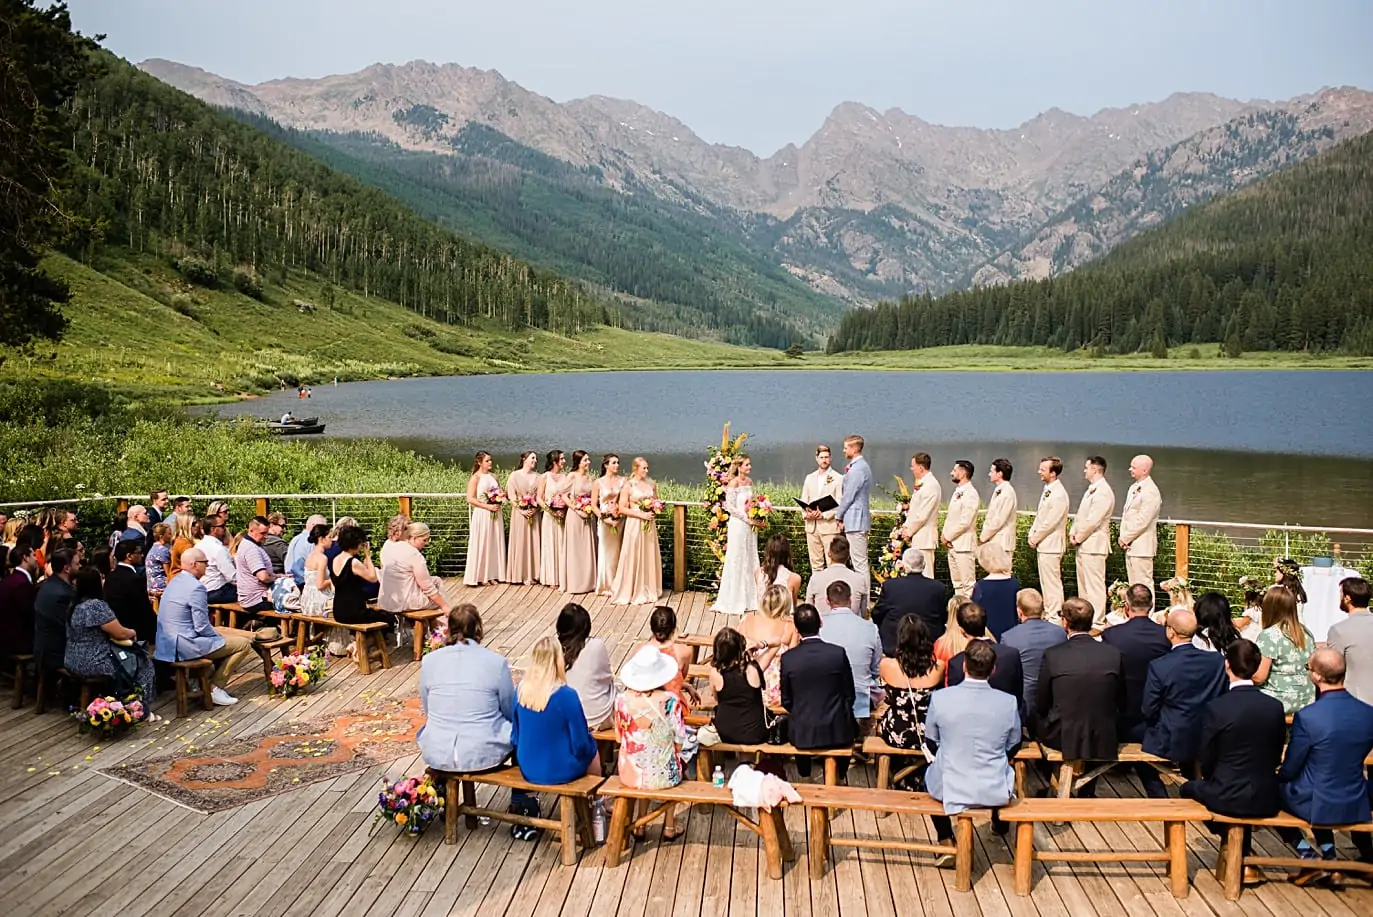 view of the gore range from the ceremony deck at Piney River Ranch